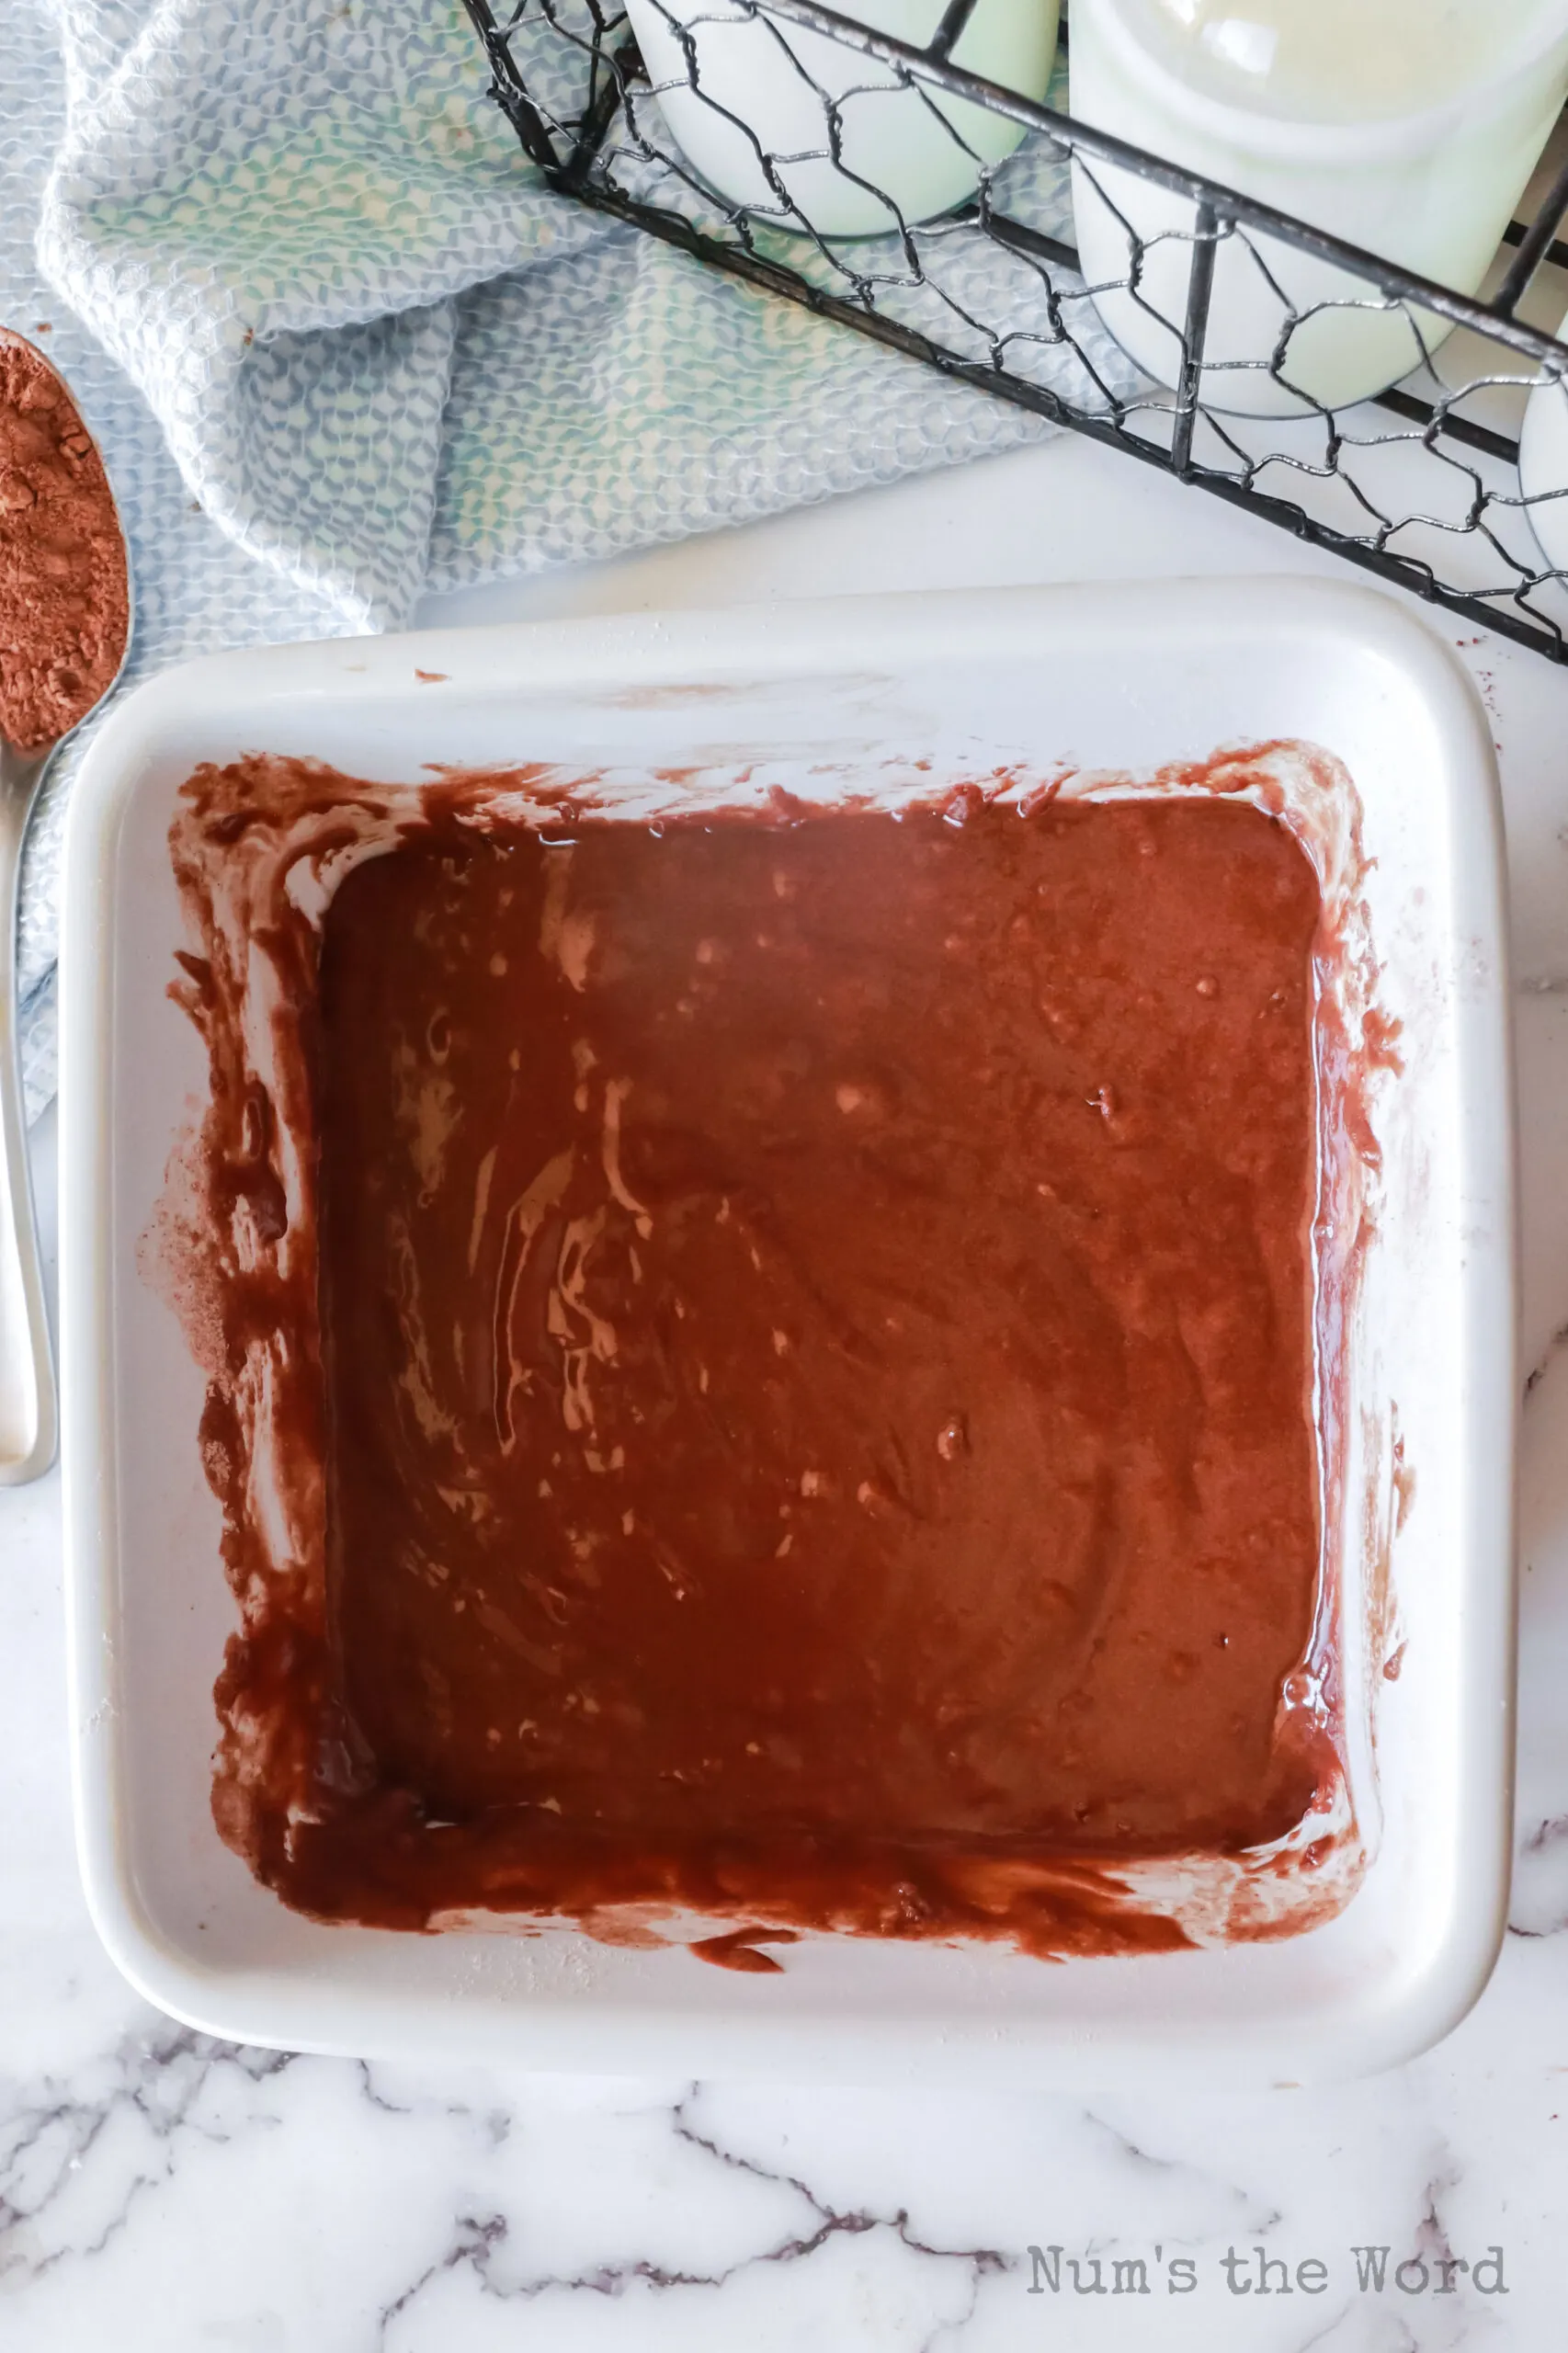 milk and vegetable oil mixed into the cocoa powder mixture in casserole dish.